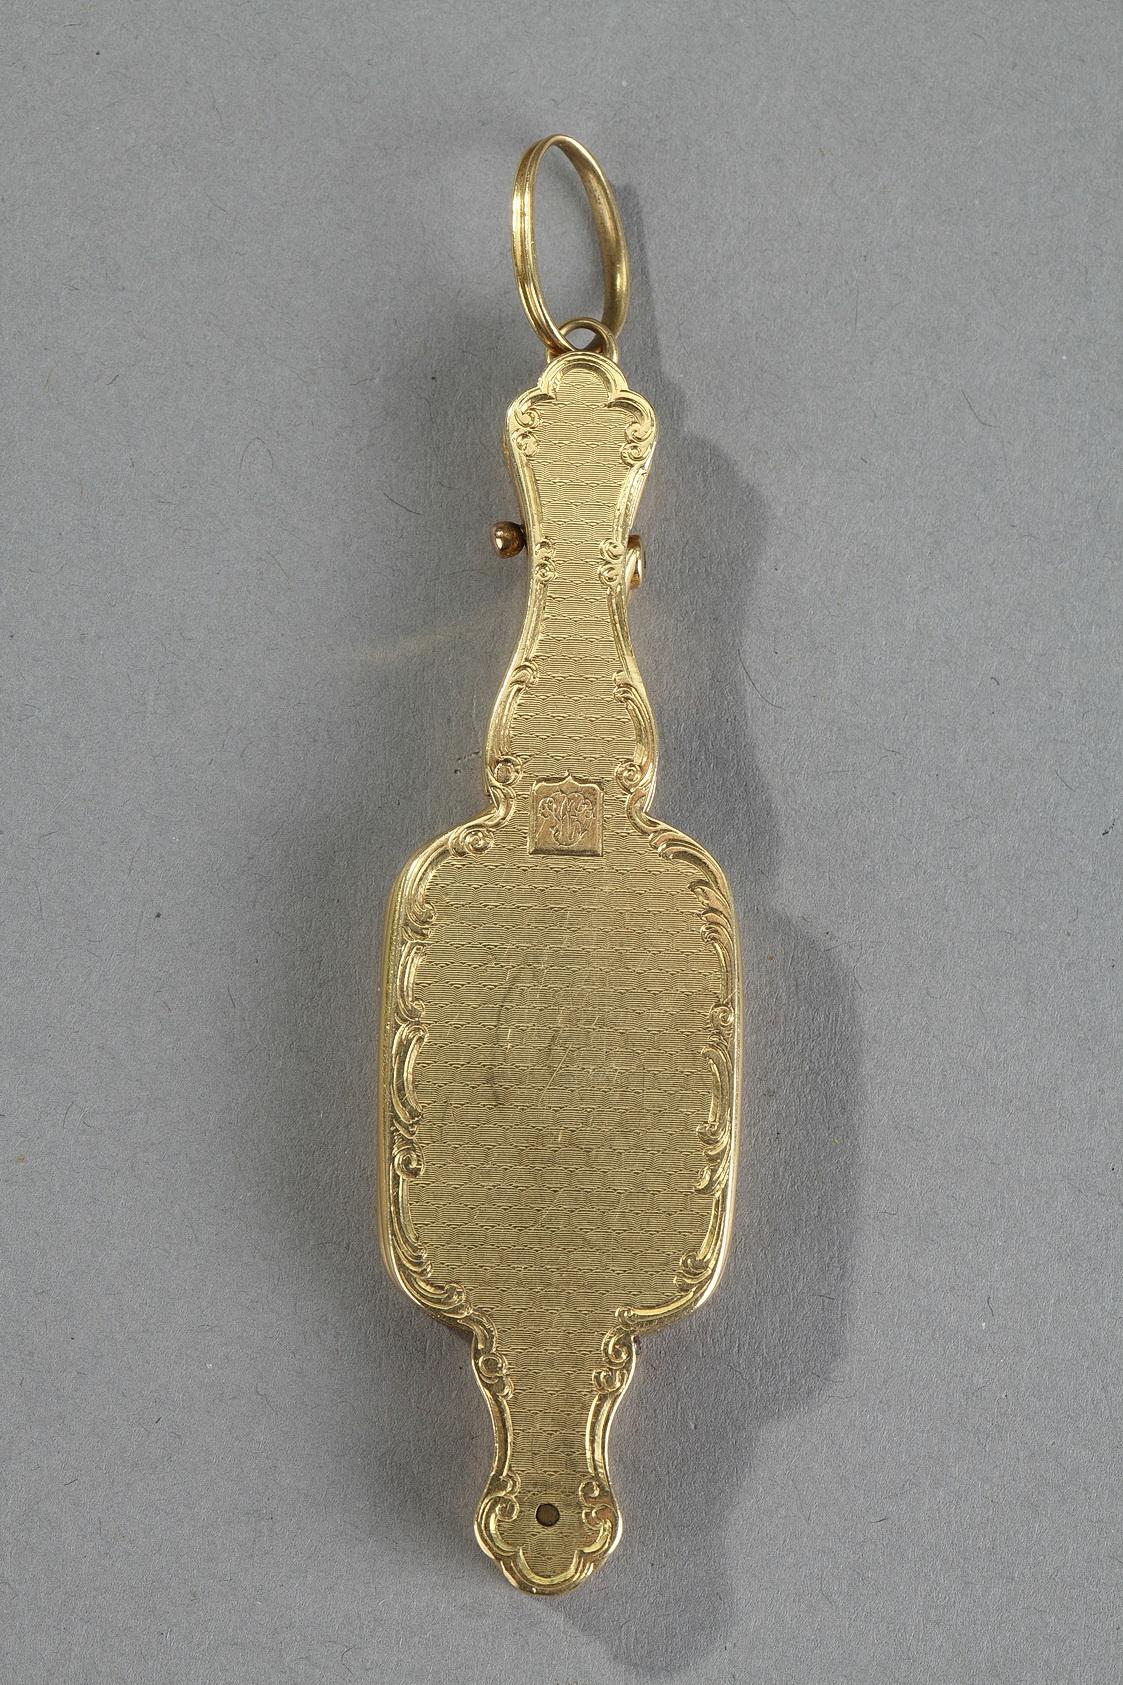 Articulated lorgnette in gold finely guilloché. The border is decorated with finely chiseled foliage. A medallion in the form of a shield includes a monogram. Articulated lorgnette in gold finely guilloché and decorated with finely chiseled foliage.